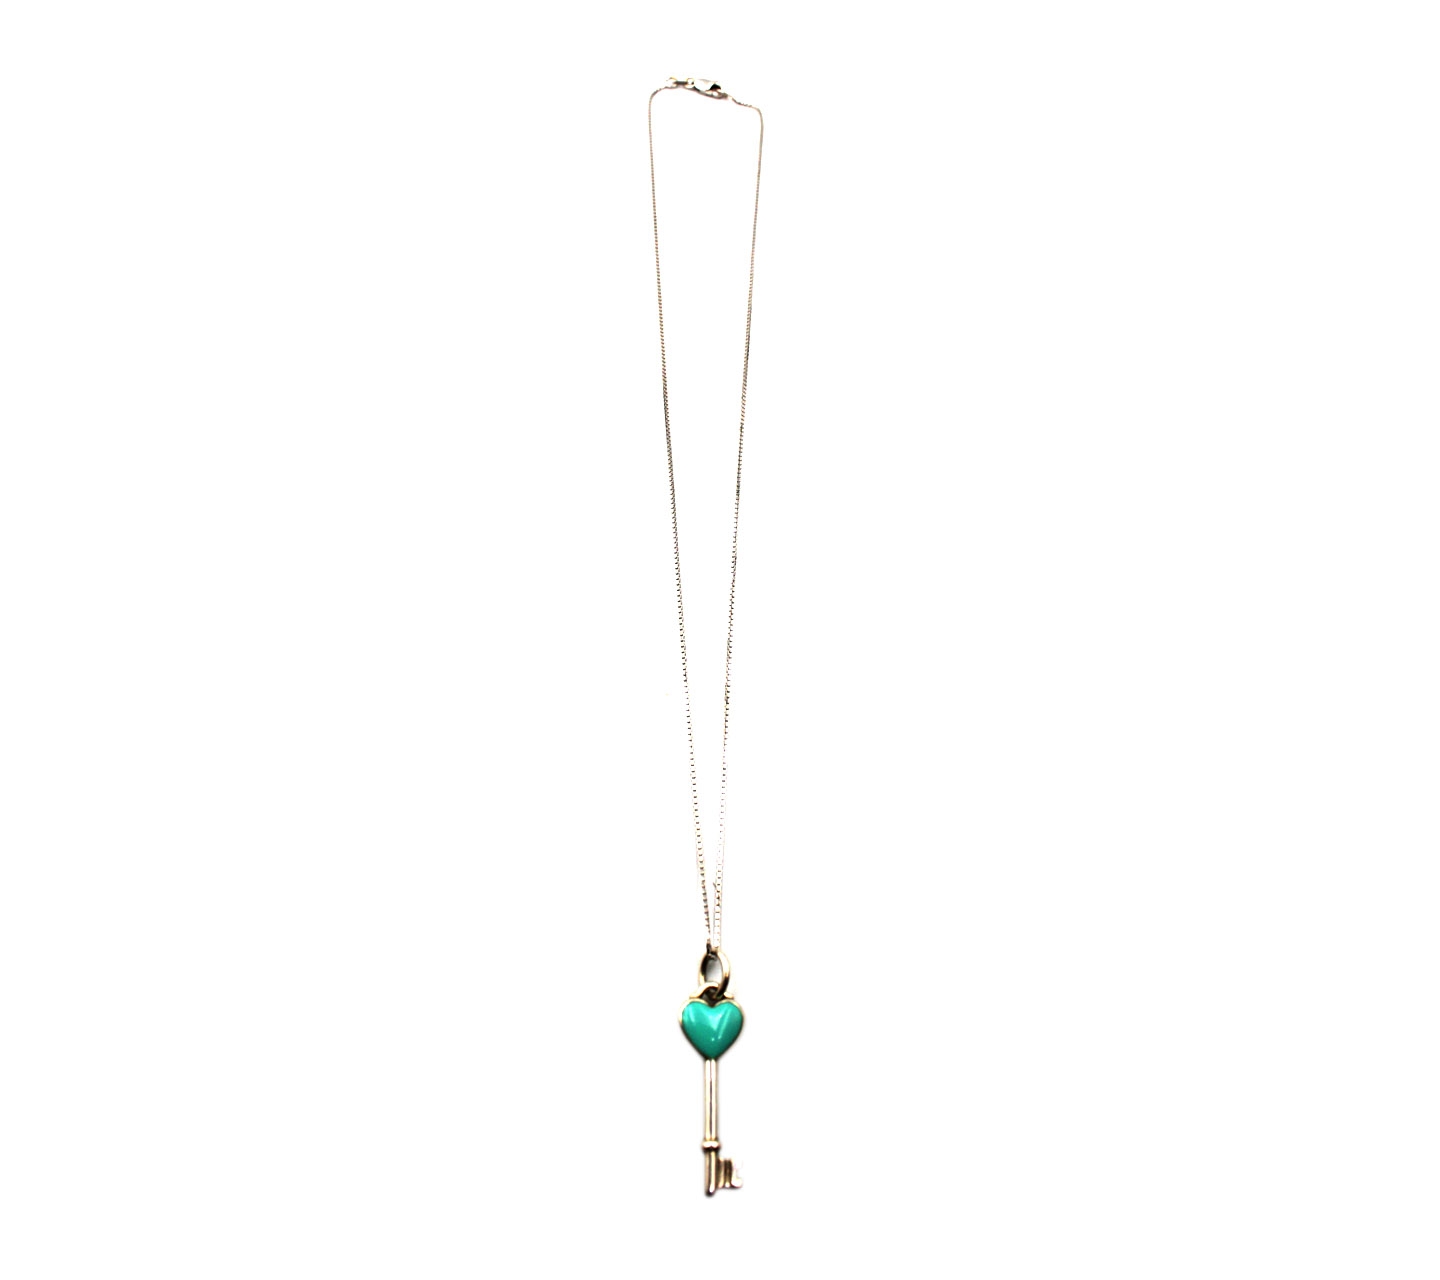 Tiffany & Co. Turquoise & Silver Love Key Necklaces